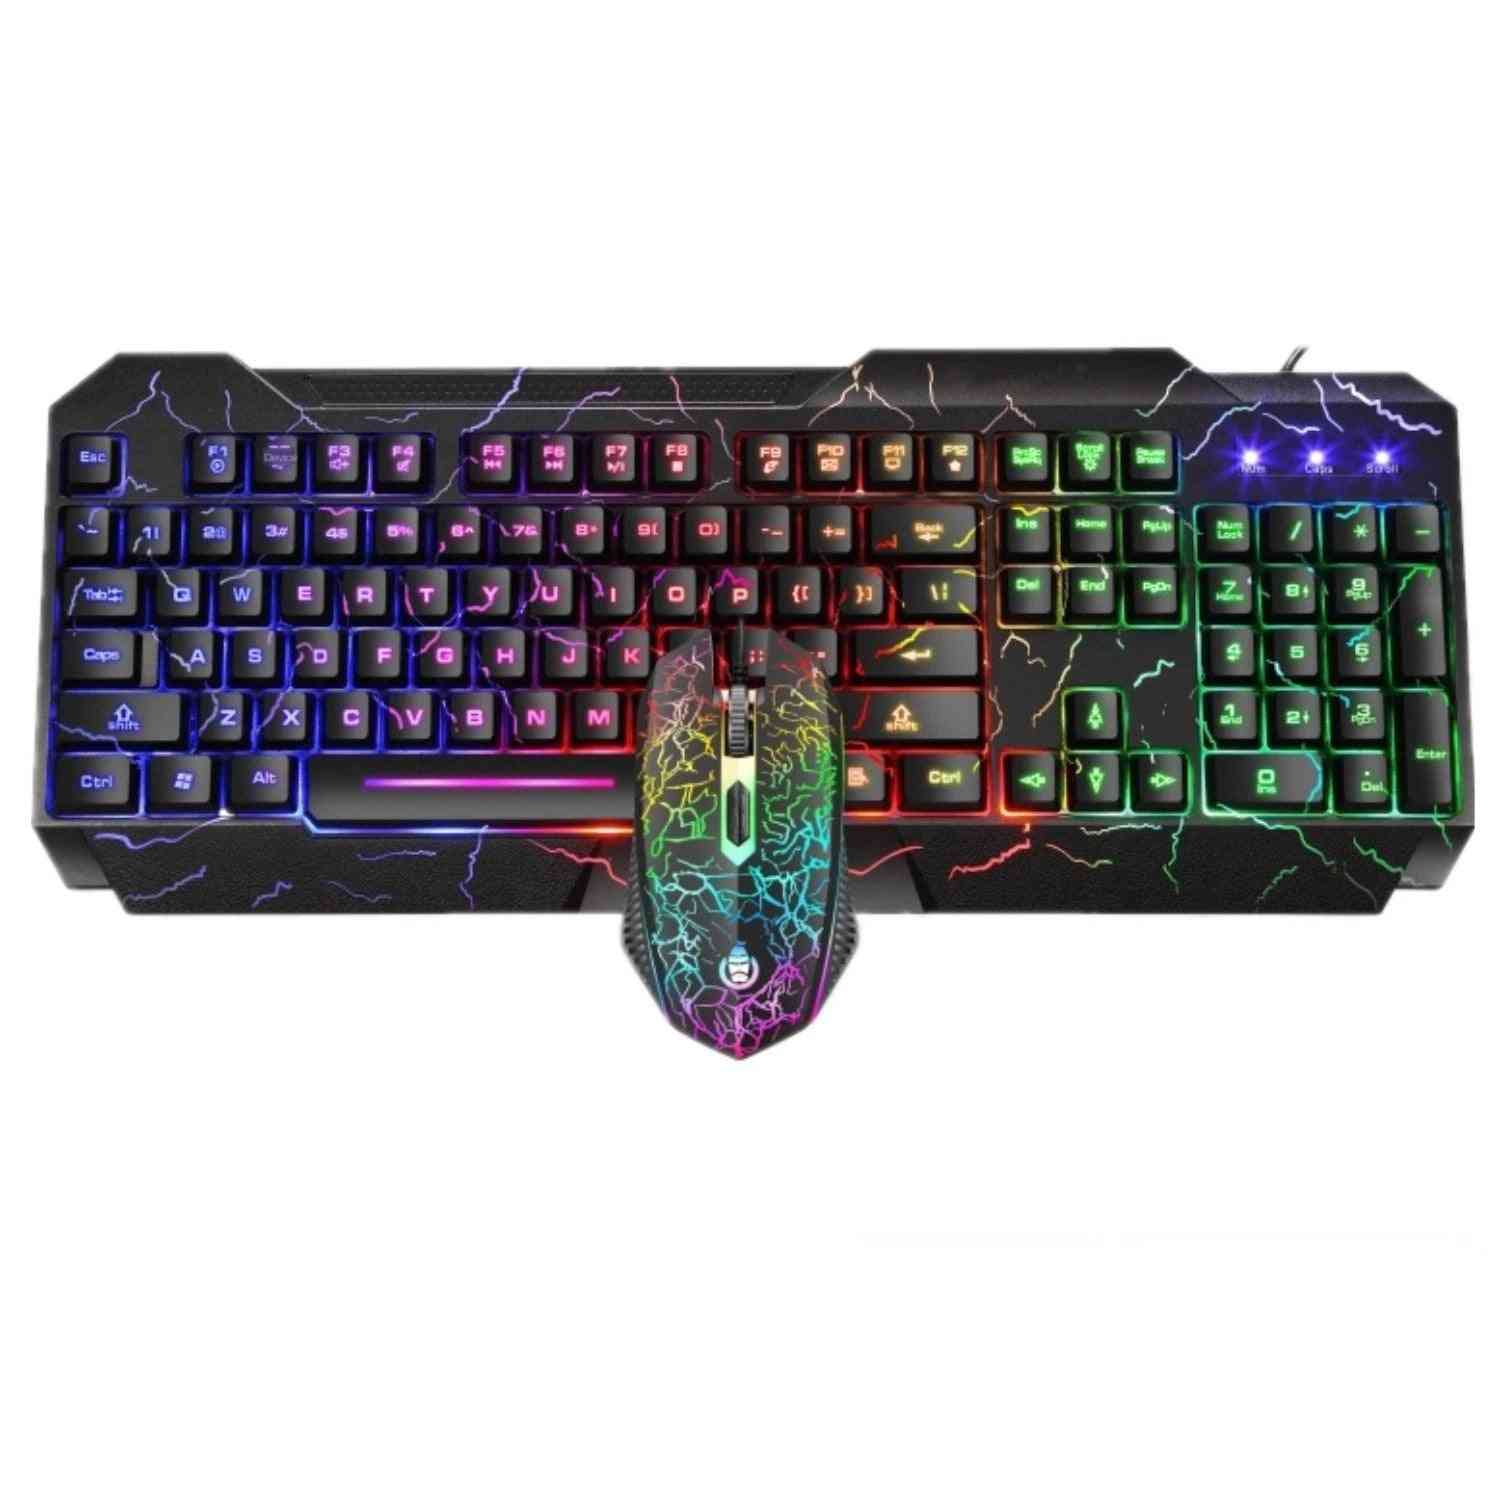 Usb Wired, Led Rgb Backlit, Gaming Keyboard, Mouse For Pc